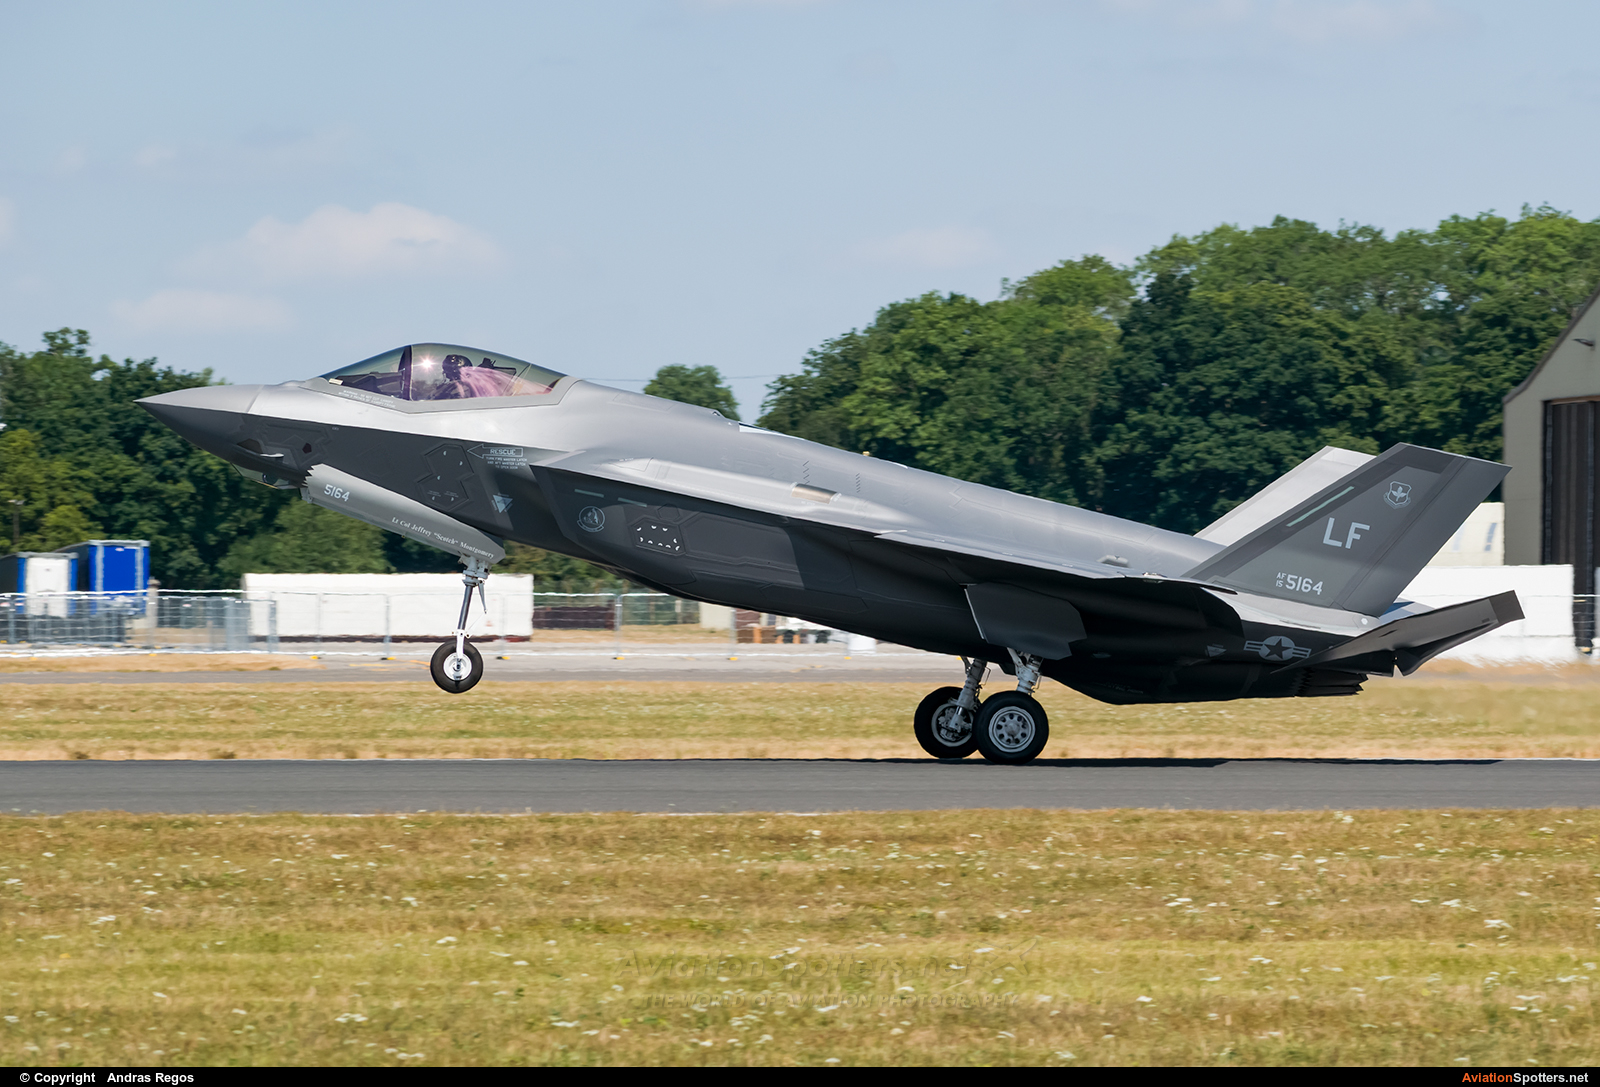 USA - Air Force  -  F-35A Lightning II  (15-5164) By Andras Regos (regos)